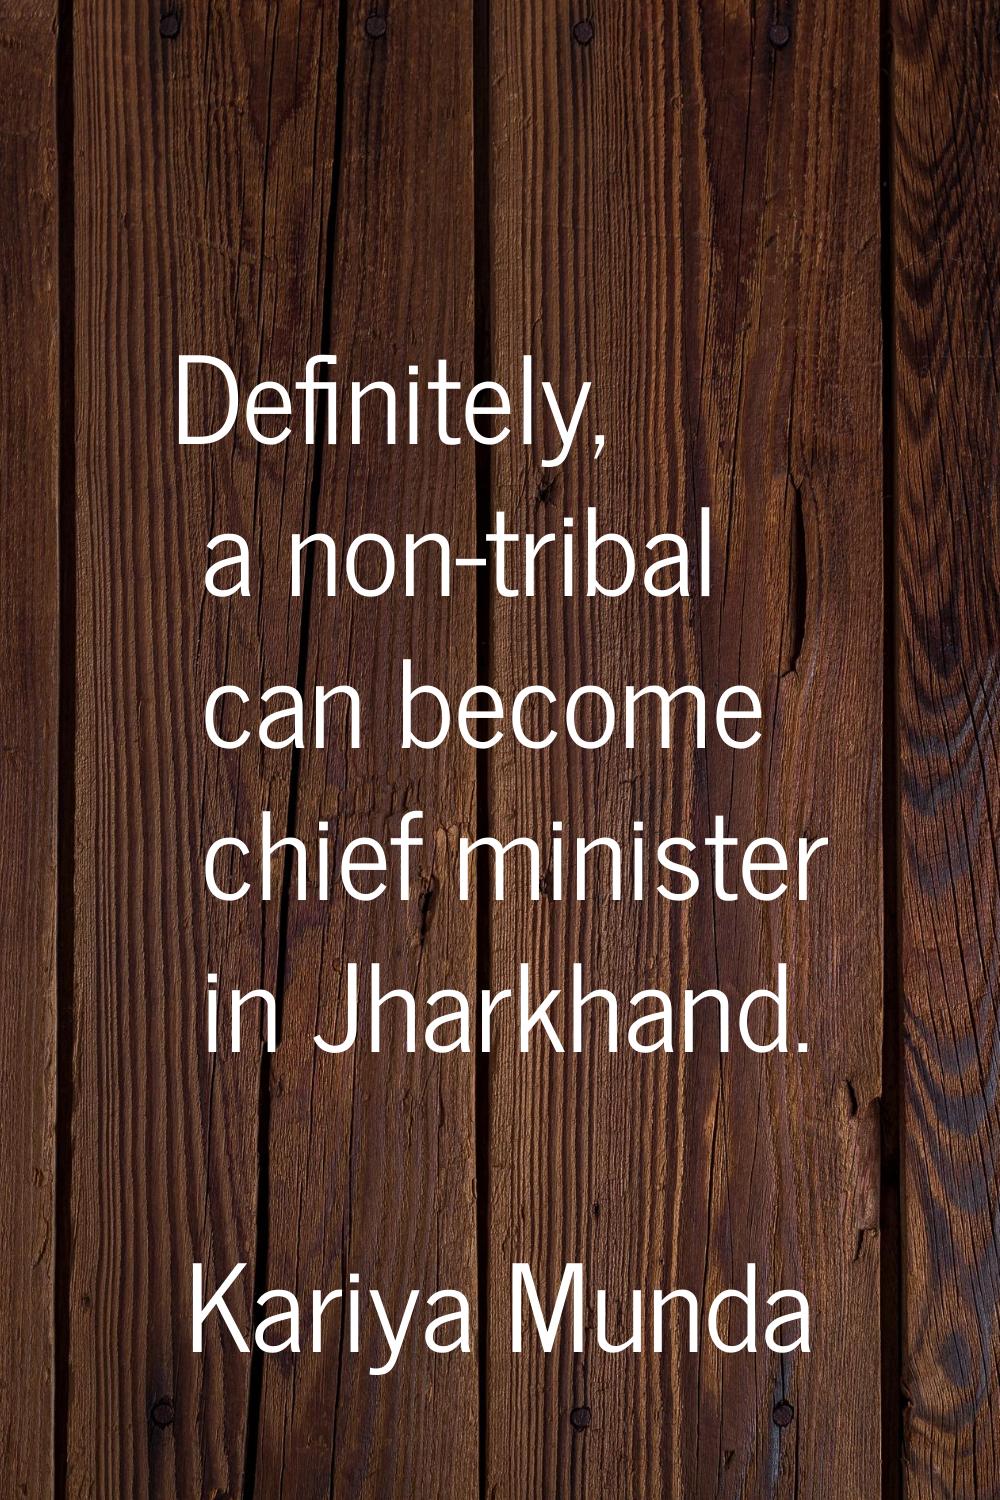 Definitely, a non-tribal can become chief minister in Jharkhand.